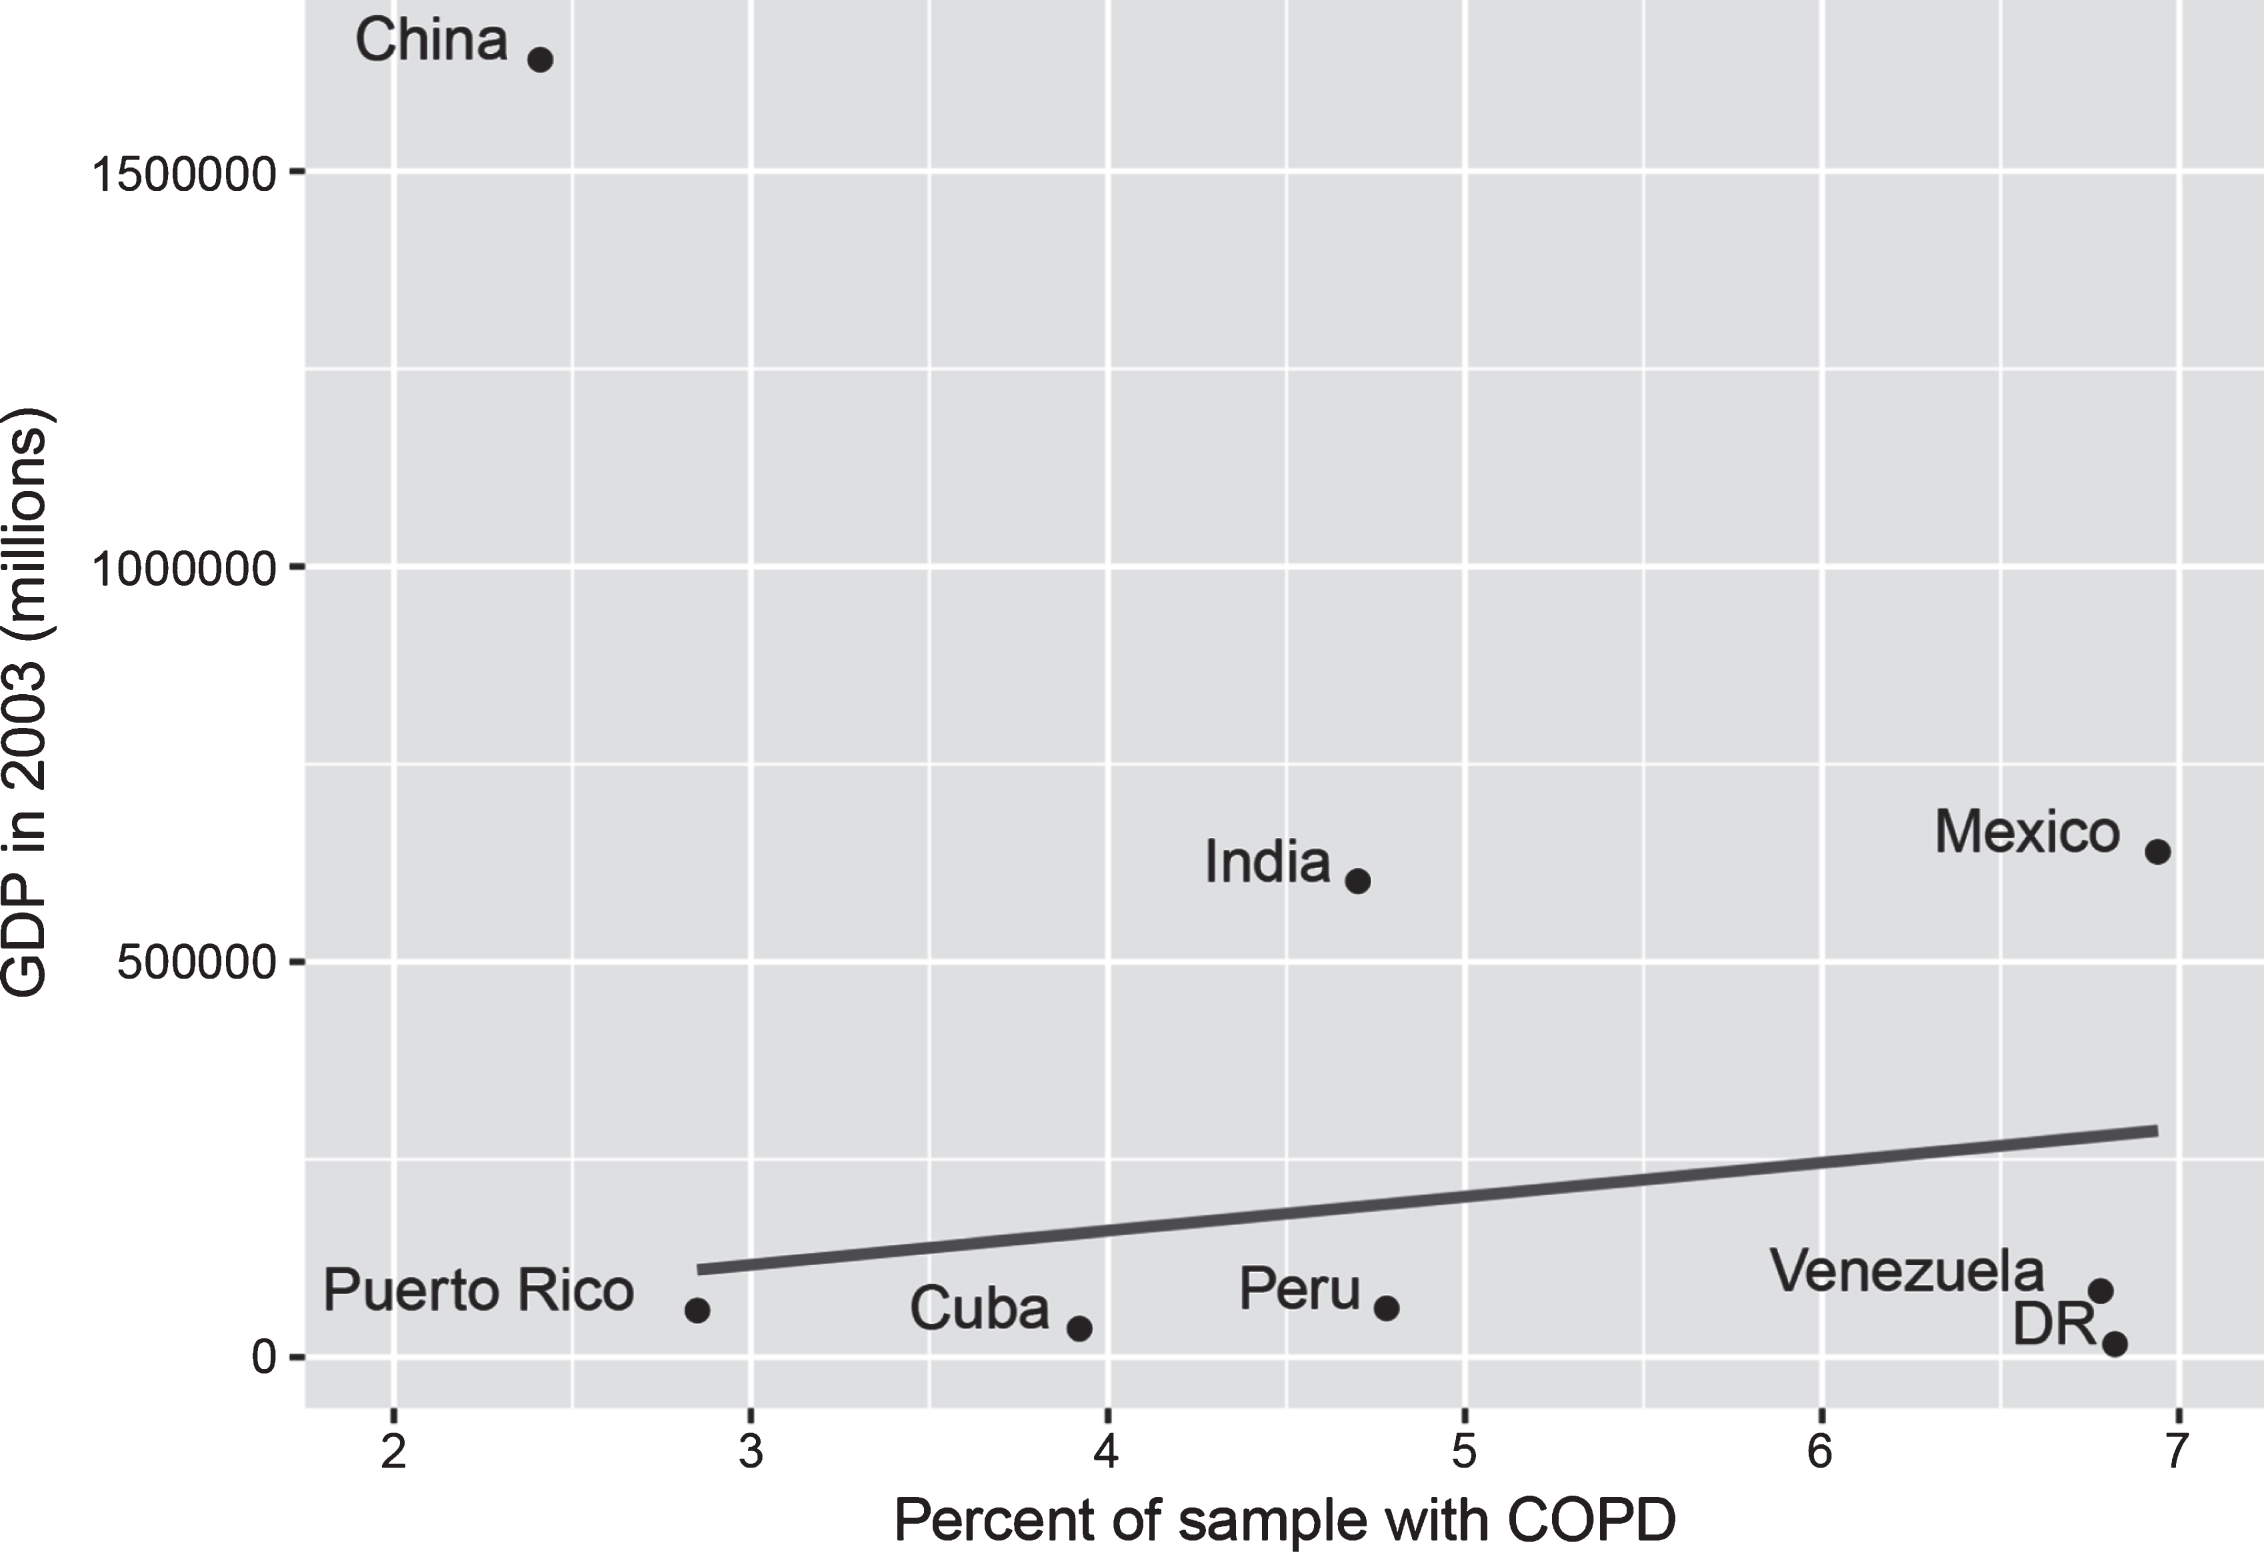 GDP and percent of sample with COPD. GDP figures sourced from Classora knowledge base, accessed 30/05/2018. Unadjusted line of best fit indicates a positive, but non-significant association between GDP and COPD (r = 0.25, p = 0.59), where China is excluded due to being an extreme outlier.